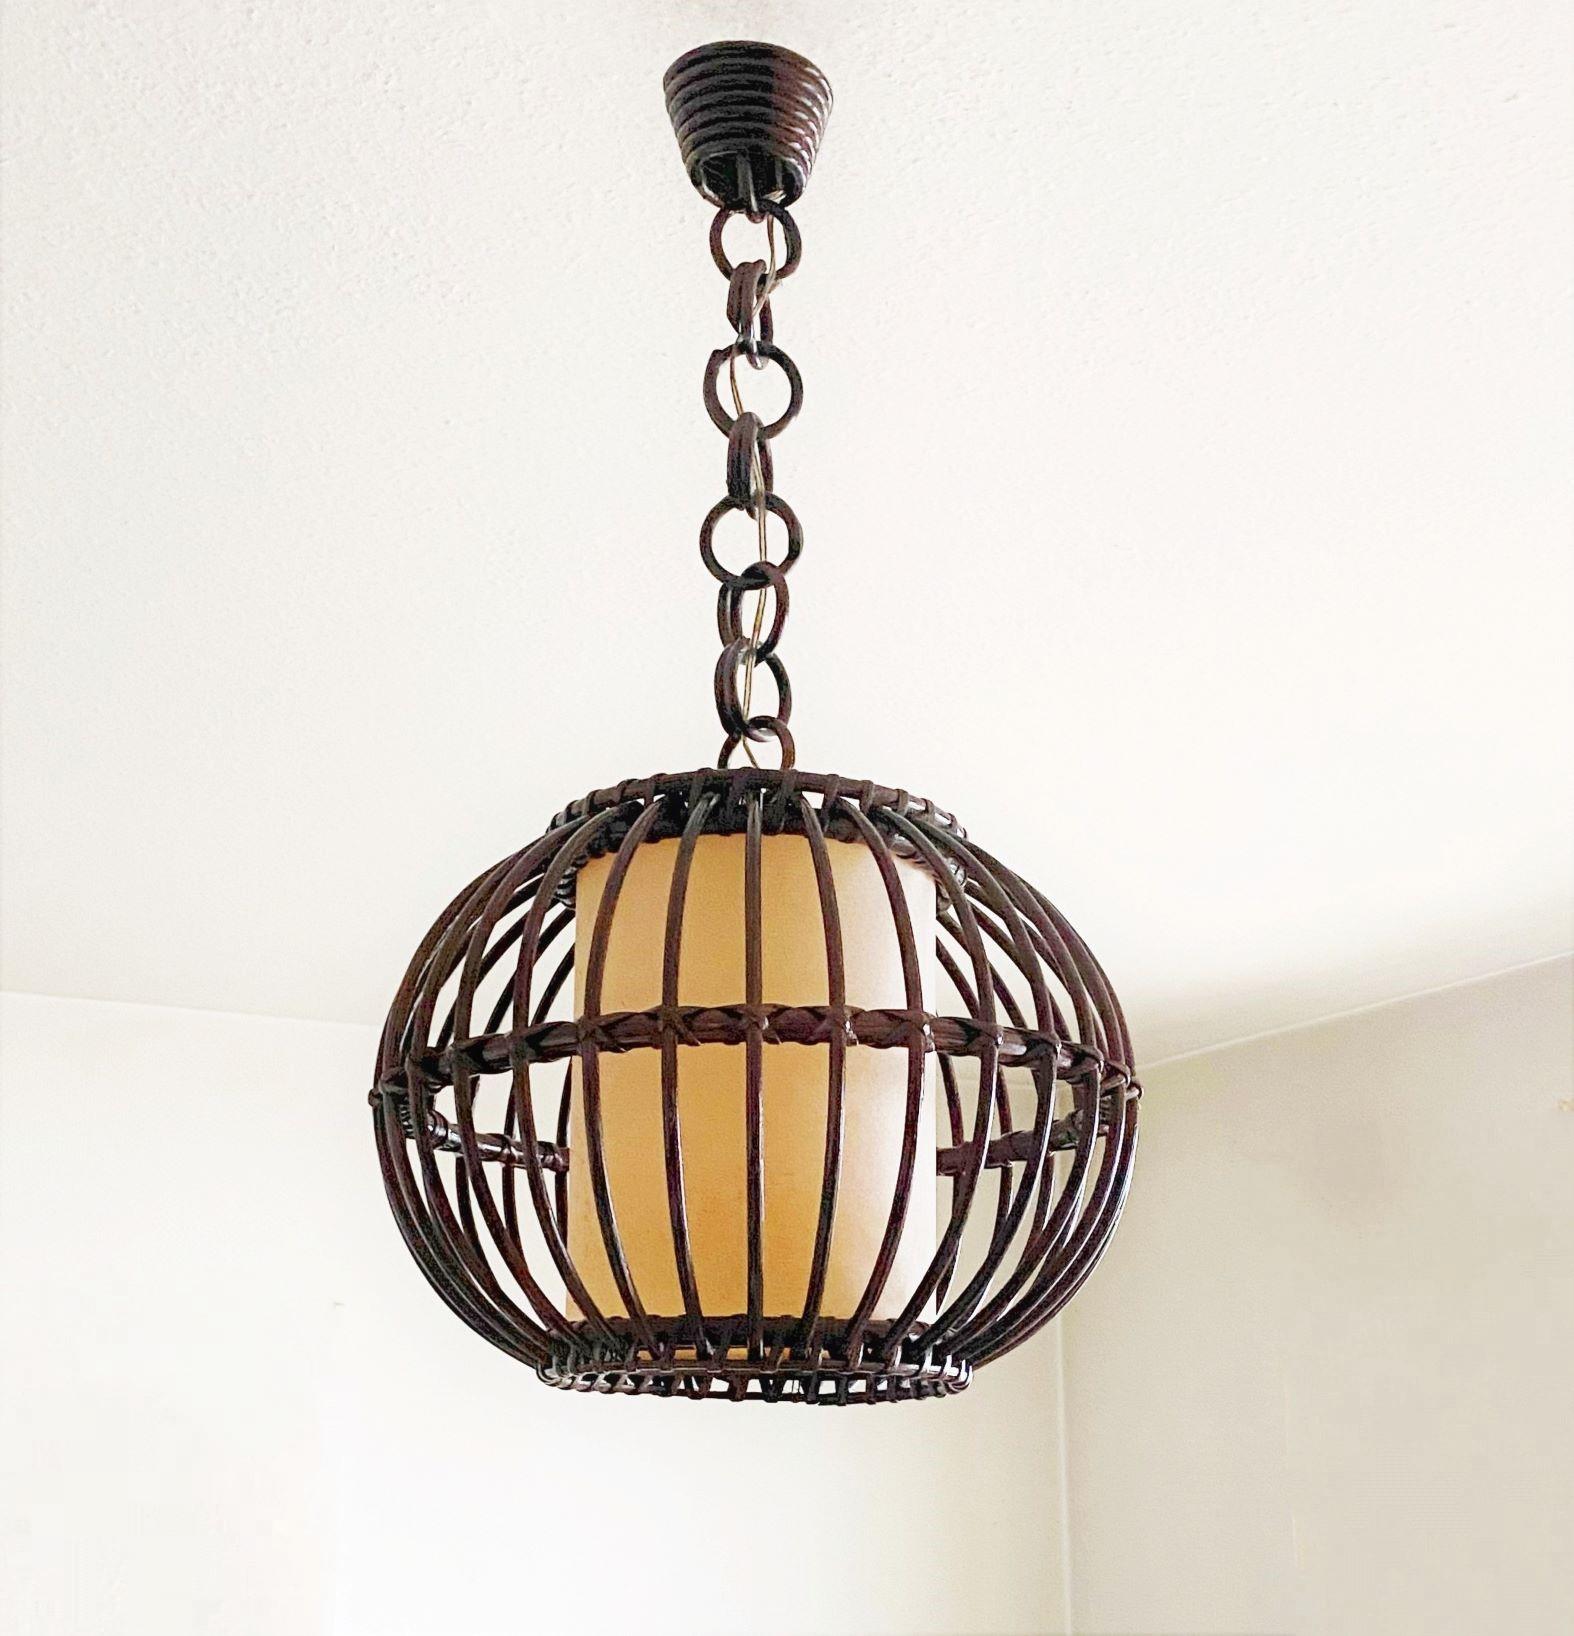 Mid-Century rattan and wicker globe pendant, Spain, 1950s. This beautiful suspension lamp is entirely handcrafted in rattan and wicker, with a central cylinder parchment lamp shade provinding a warm and pleasant light. The chain is composed of